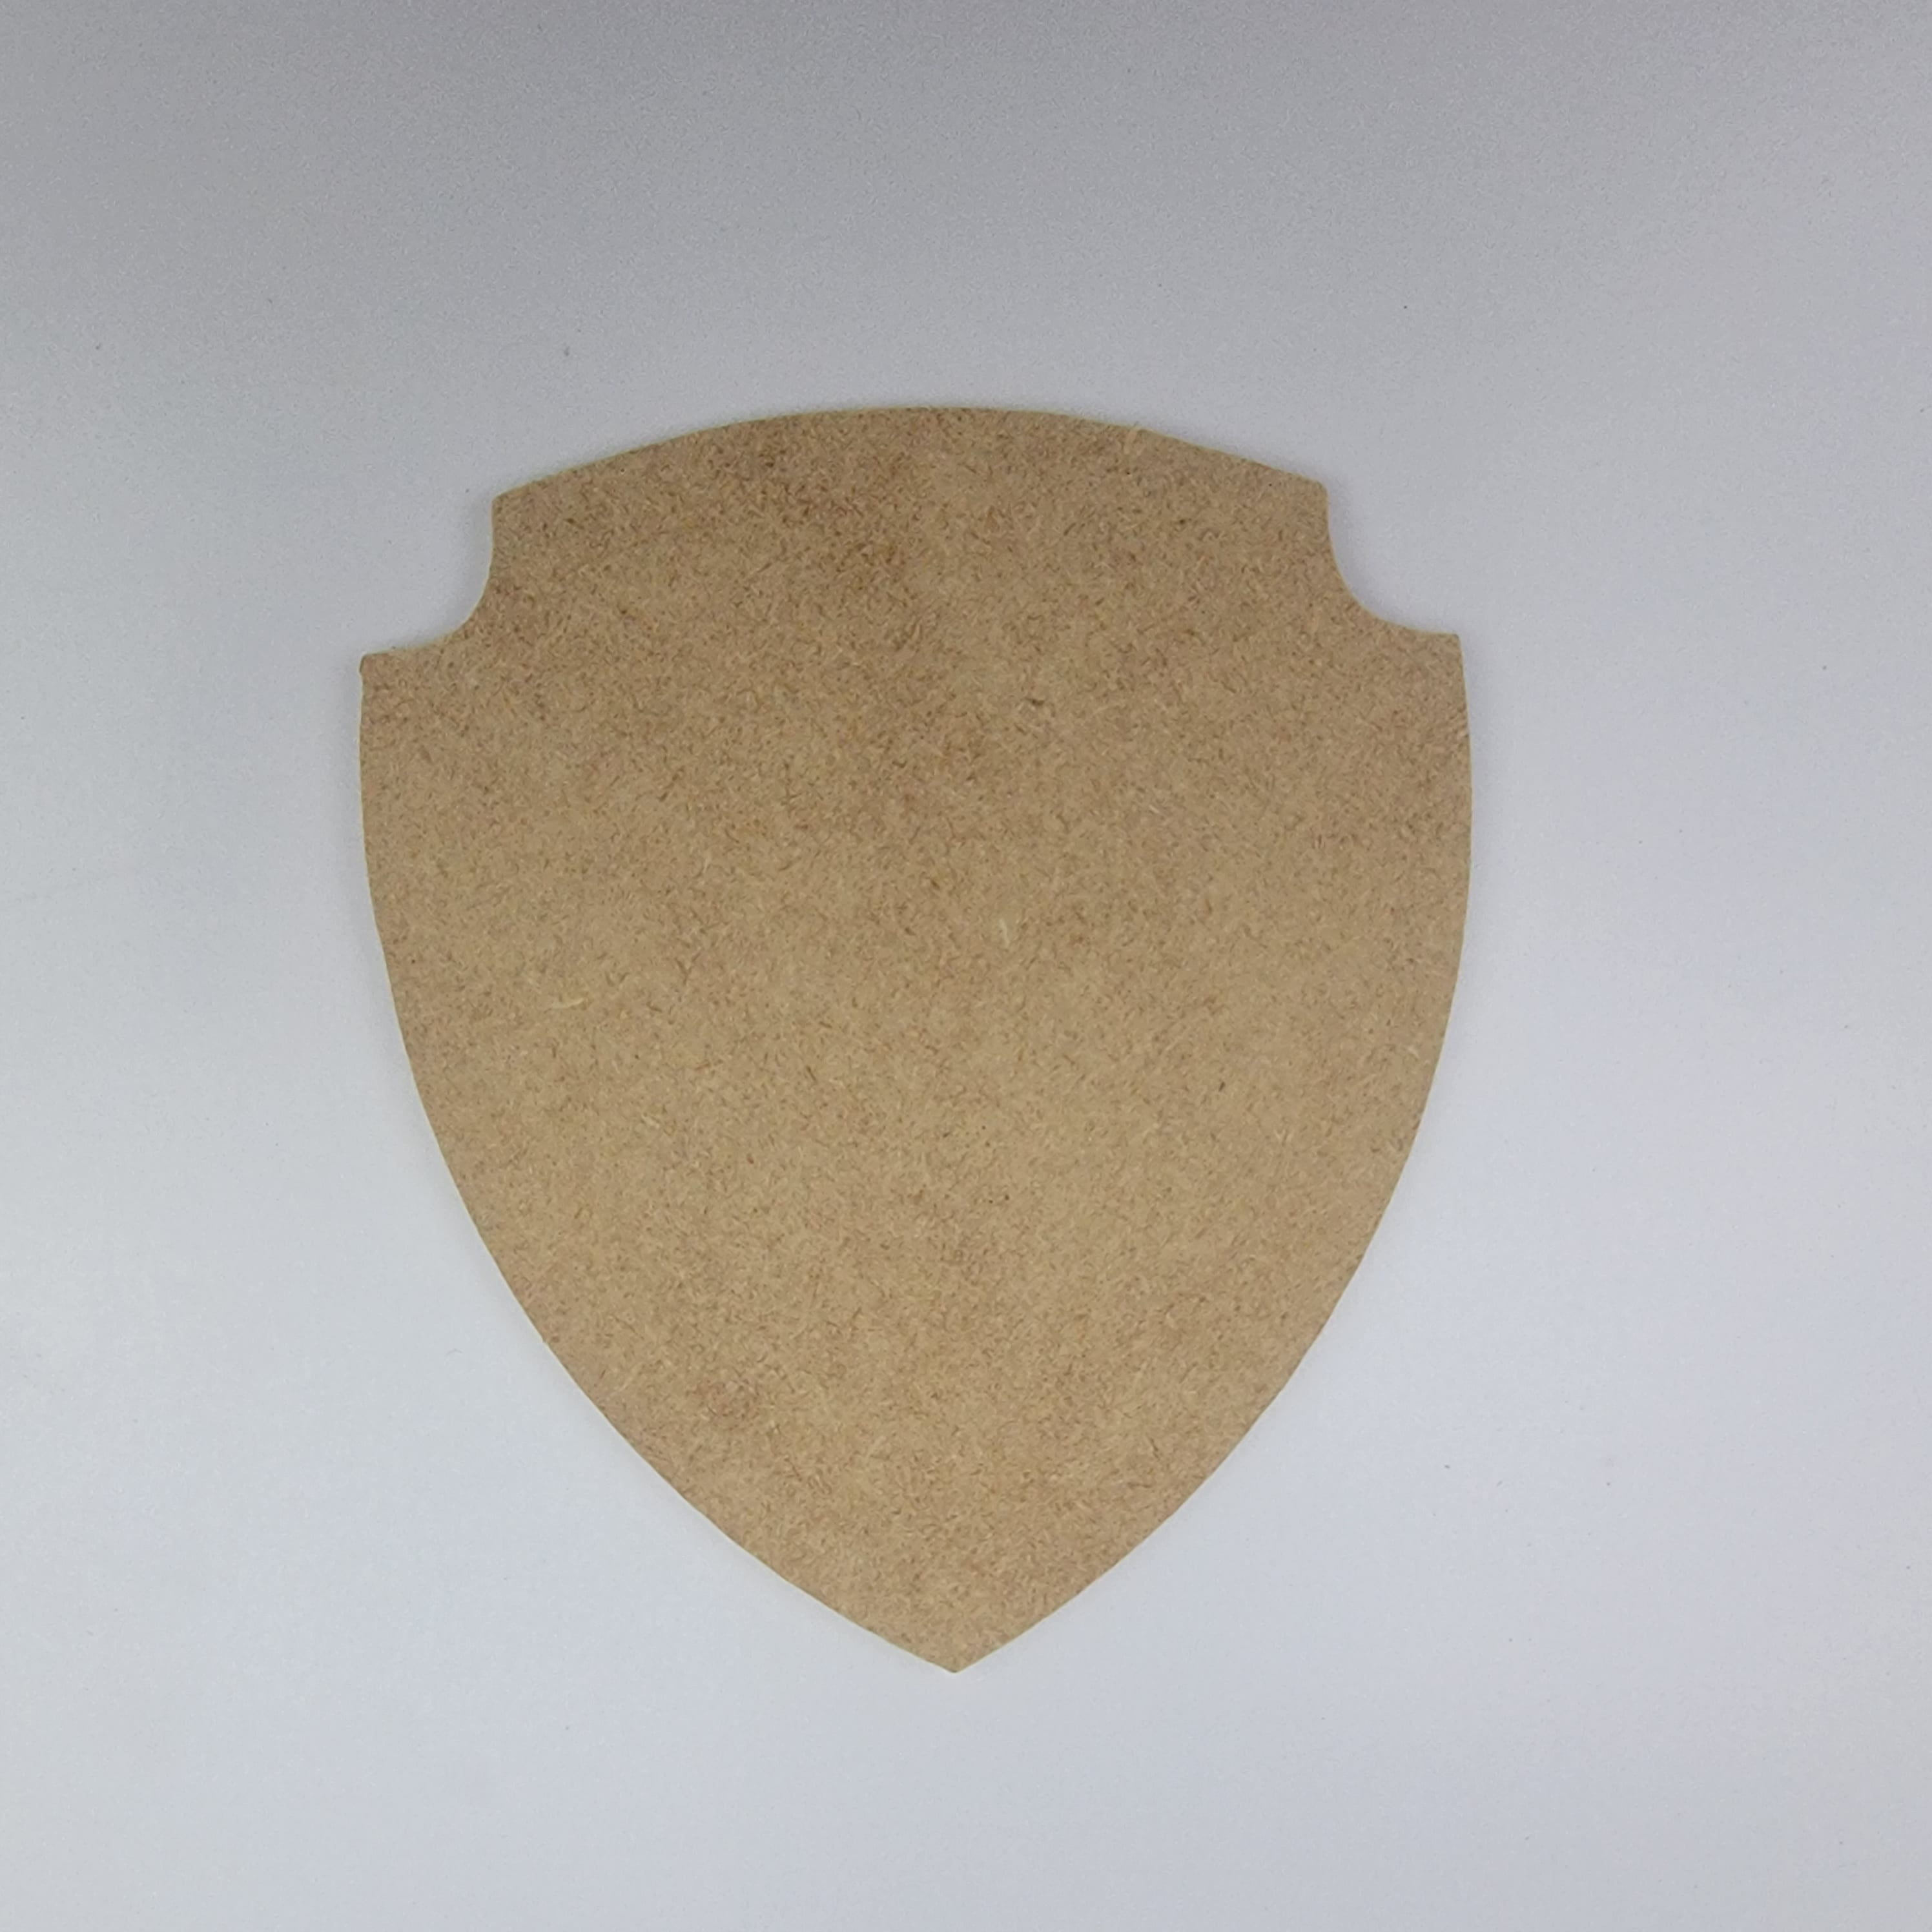 2 Shield Laser Cut Out Wood Shape Craft Supply